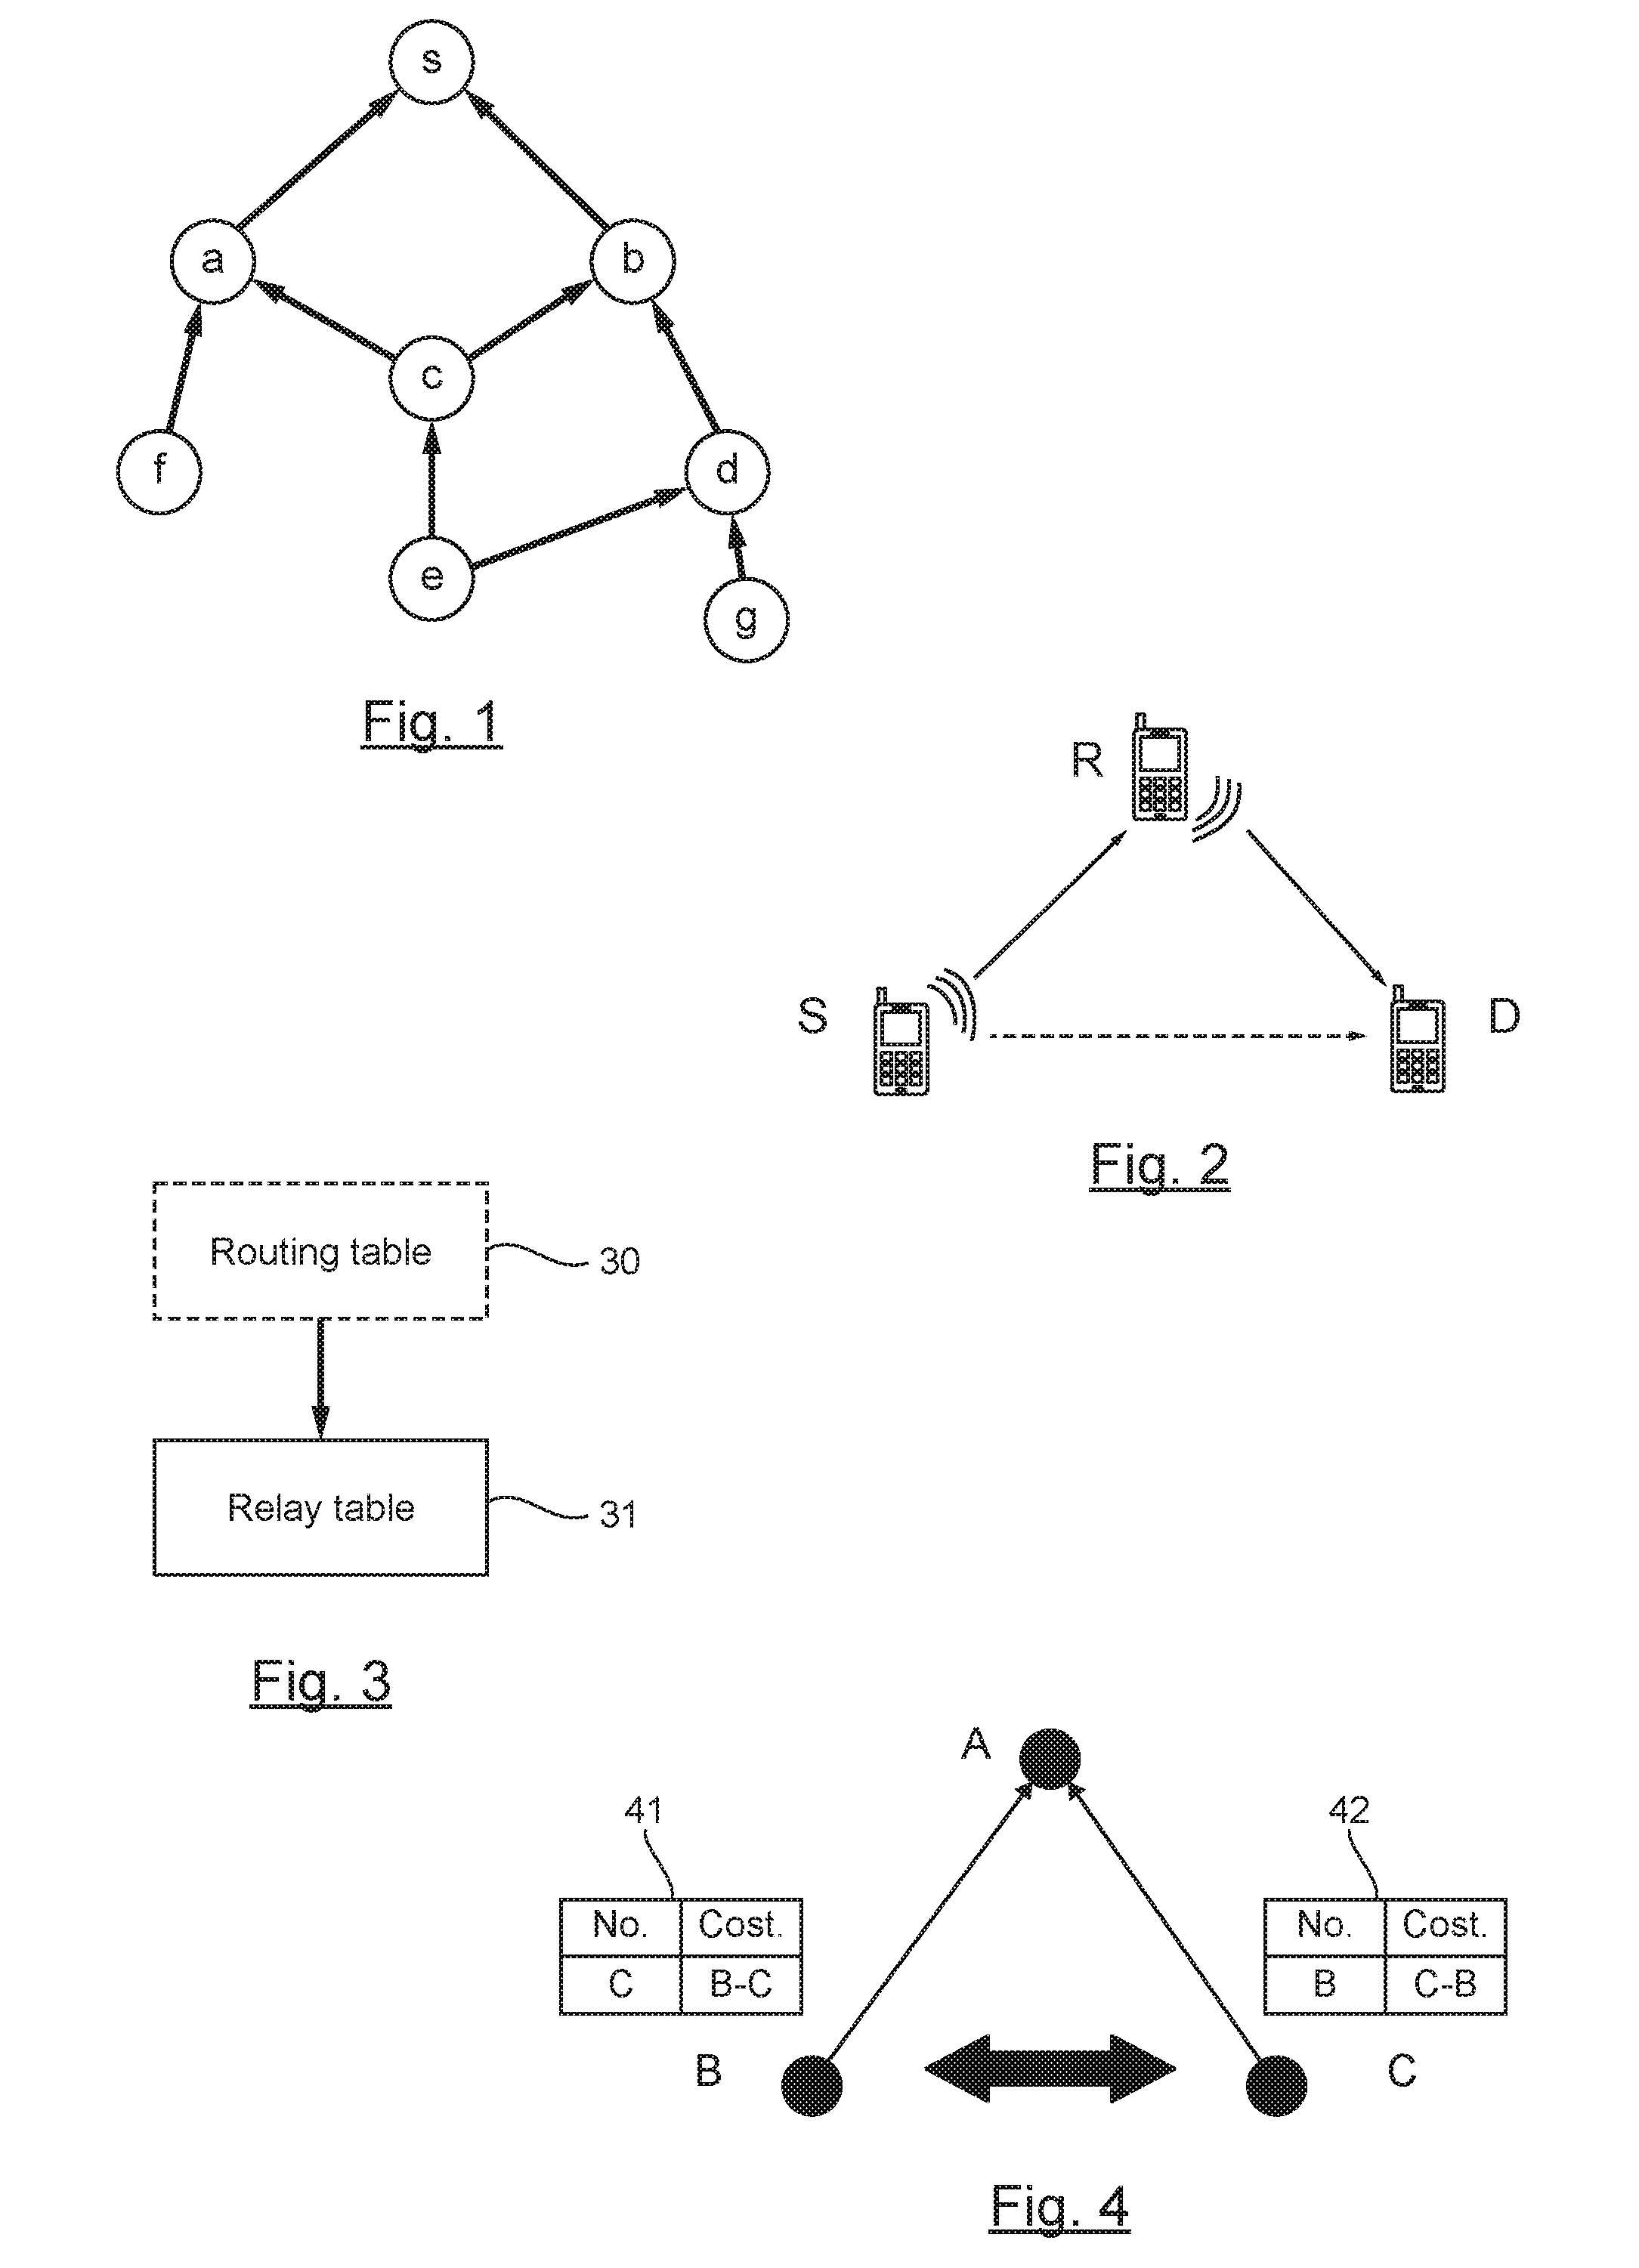 A method for configuring a network comprising several nodes, a method for transmitting data in said network, and corresponding equipment and computer program